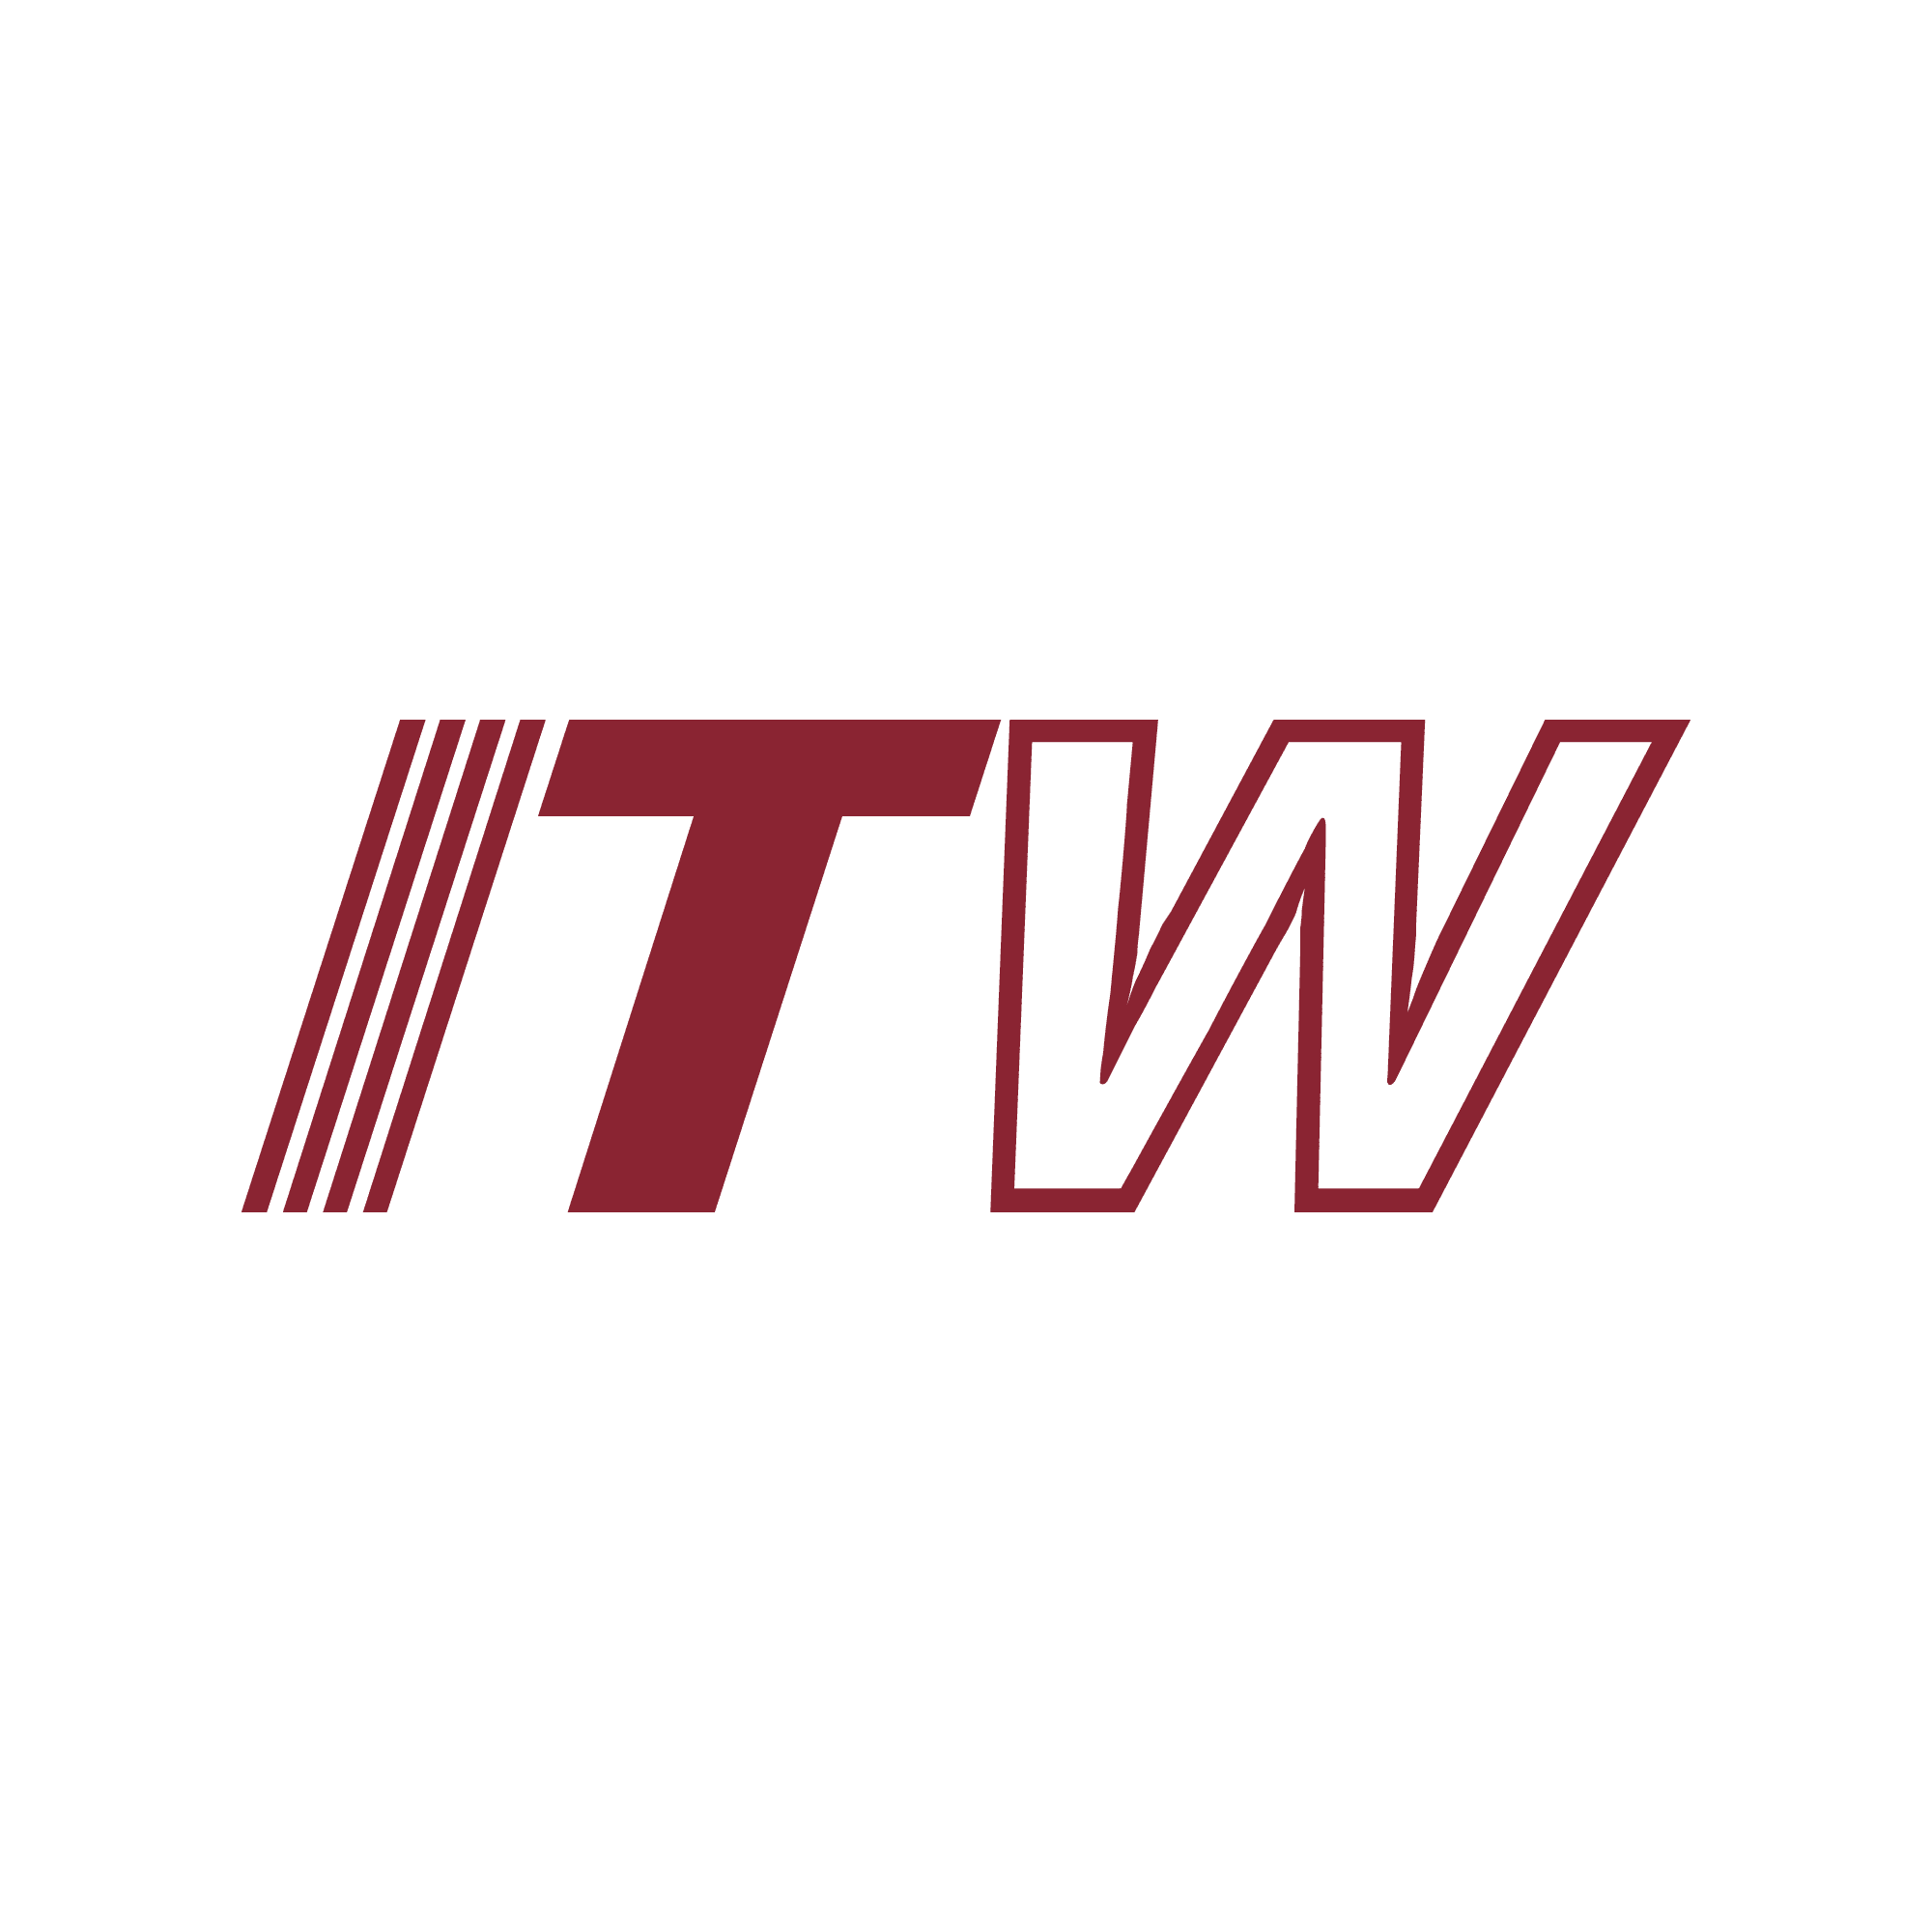 The itw logo on a white background.